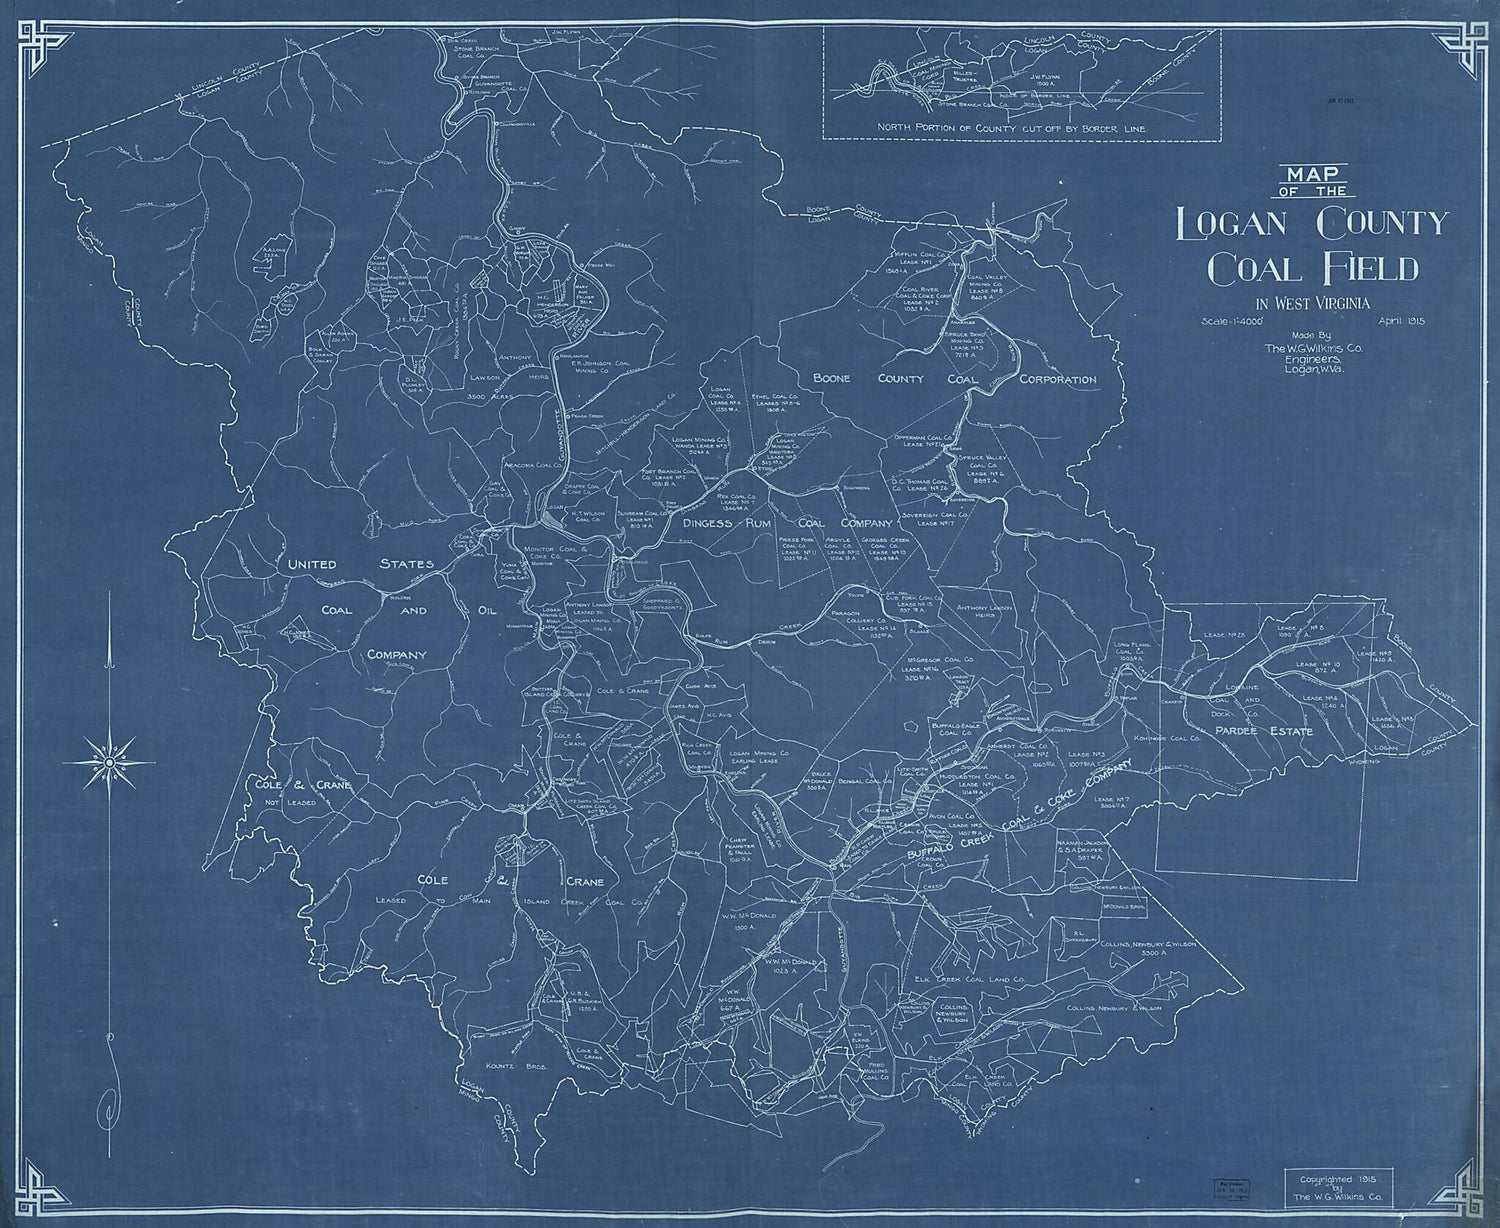 This old map of Map of the Logan County Coal Field In West Virginia from 1915 was created by W. G. Co Wilkins in 1915